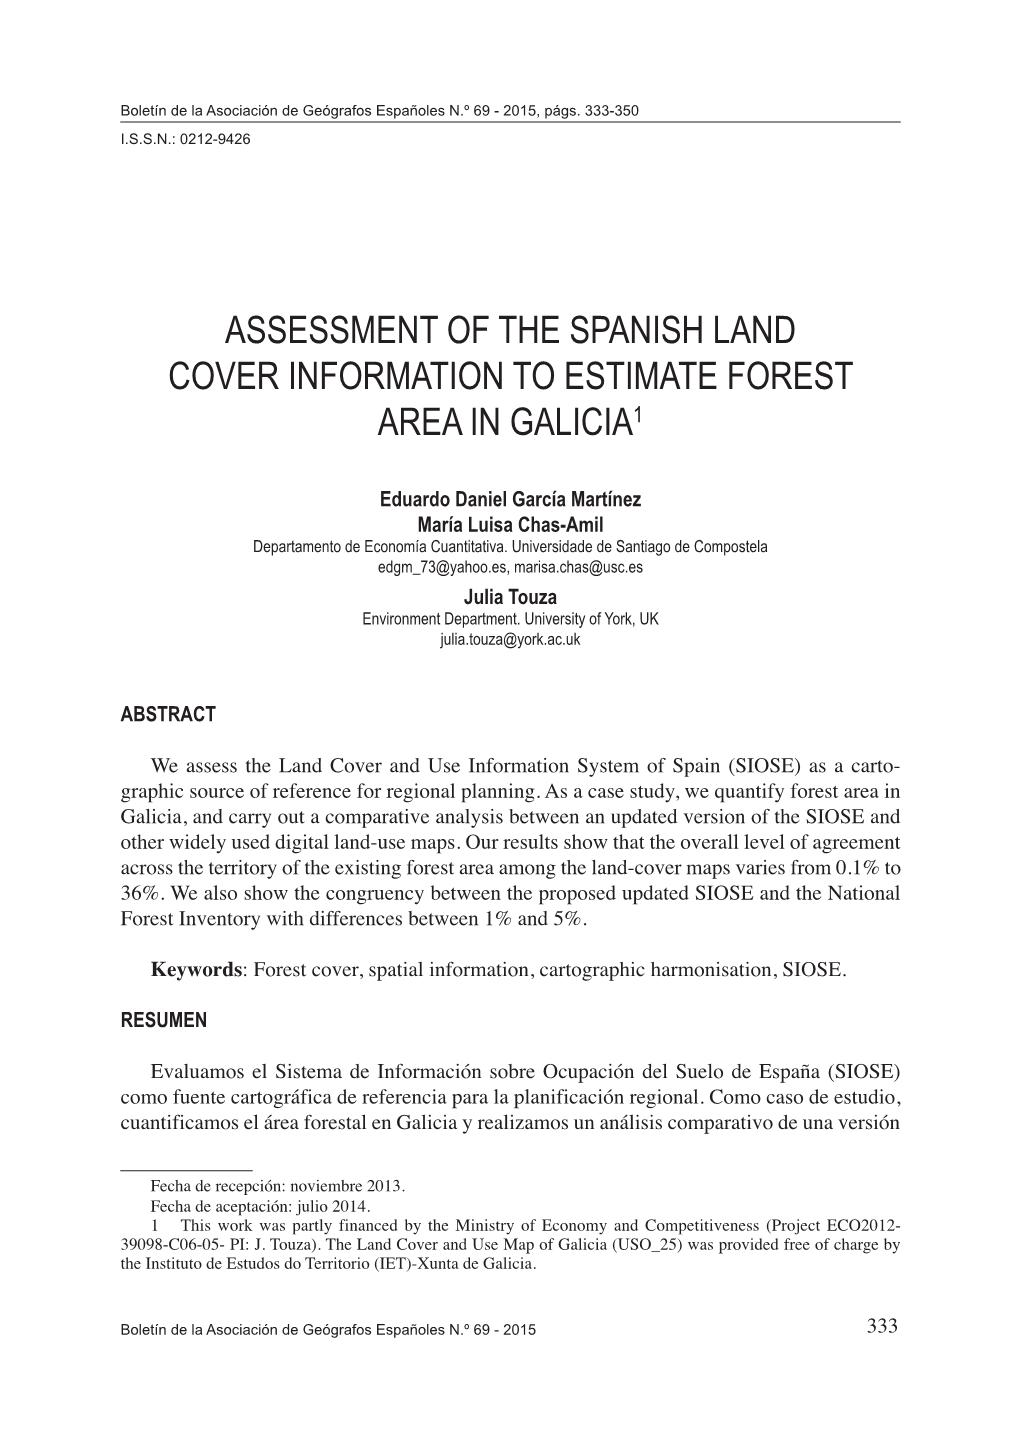 Assessment of the Spanish Land Cover Information to Estimate Forest Area in Galicia1